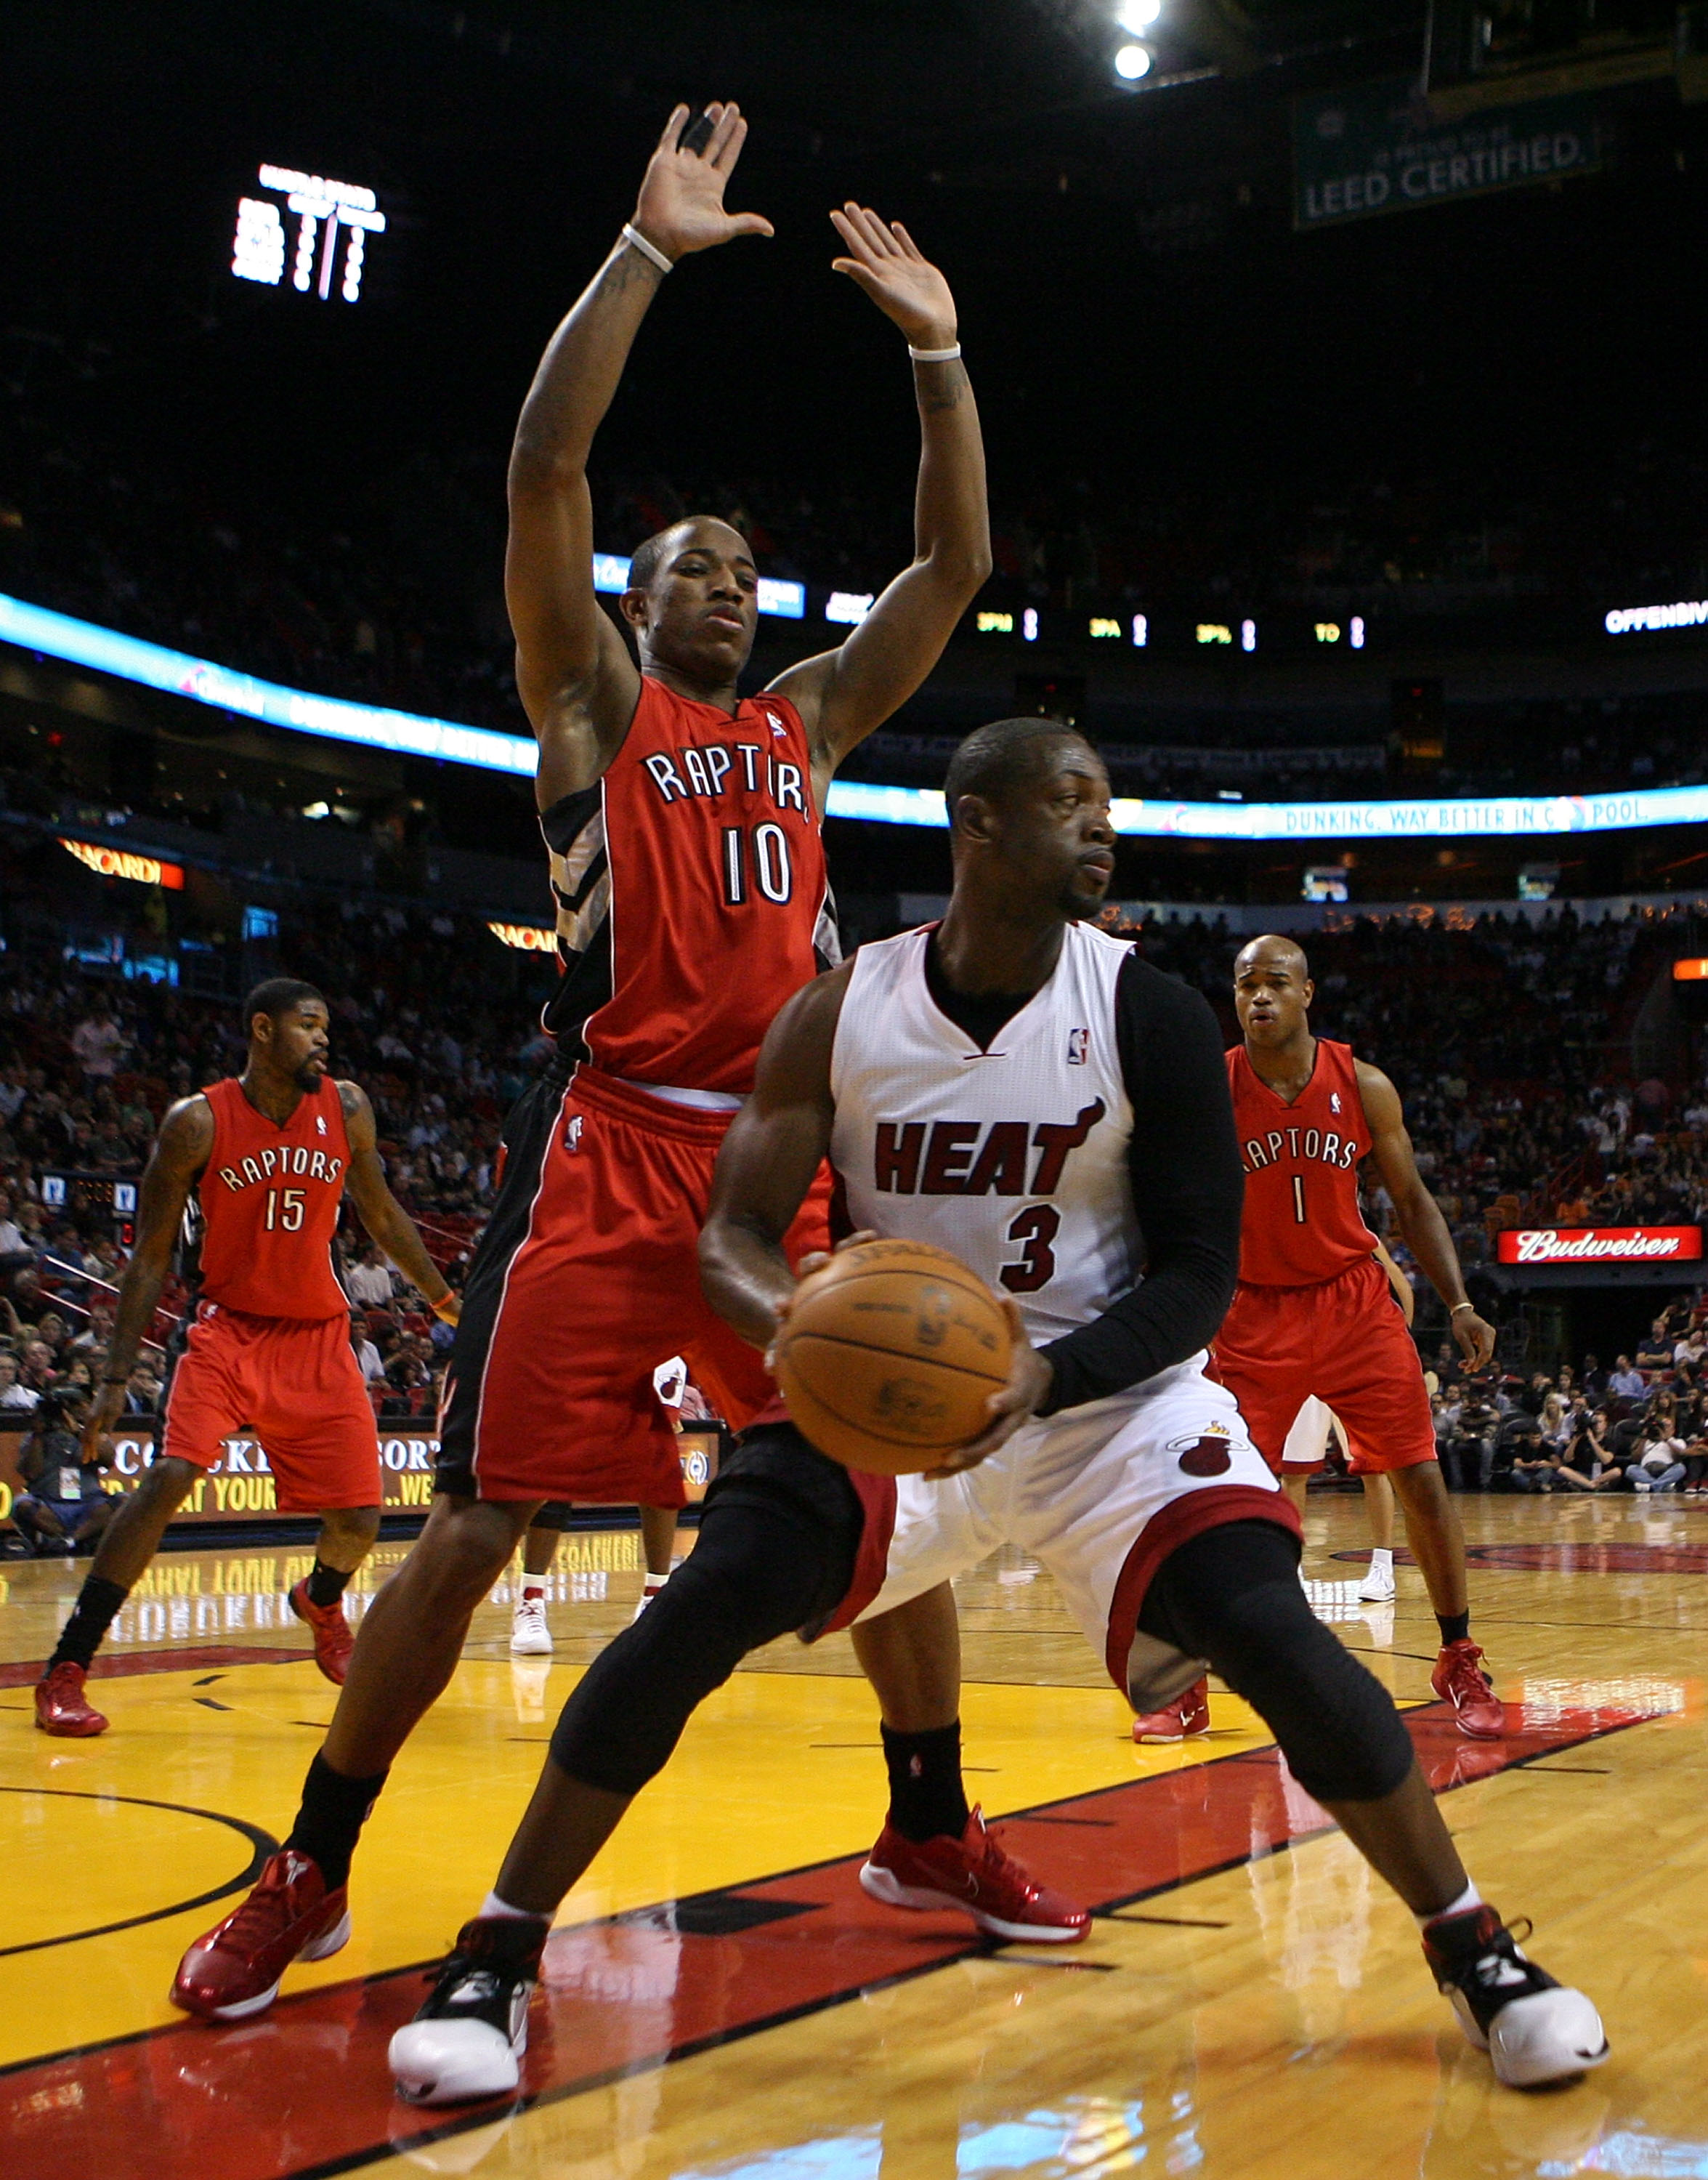 MIAMI - NOVEMBER 13:  Guard Dwyane Wade #3 of the Miami Heat looks to pass against DeMar DeRozan #10 of the Toronto Raptors at American Airlines Arena on November 13, 2010 in Miami, Florida. NOTE TO USER: User expressly acknowledges and agrees that, by do